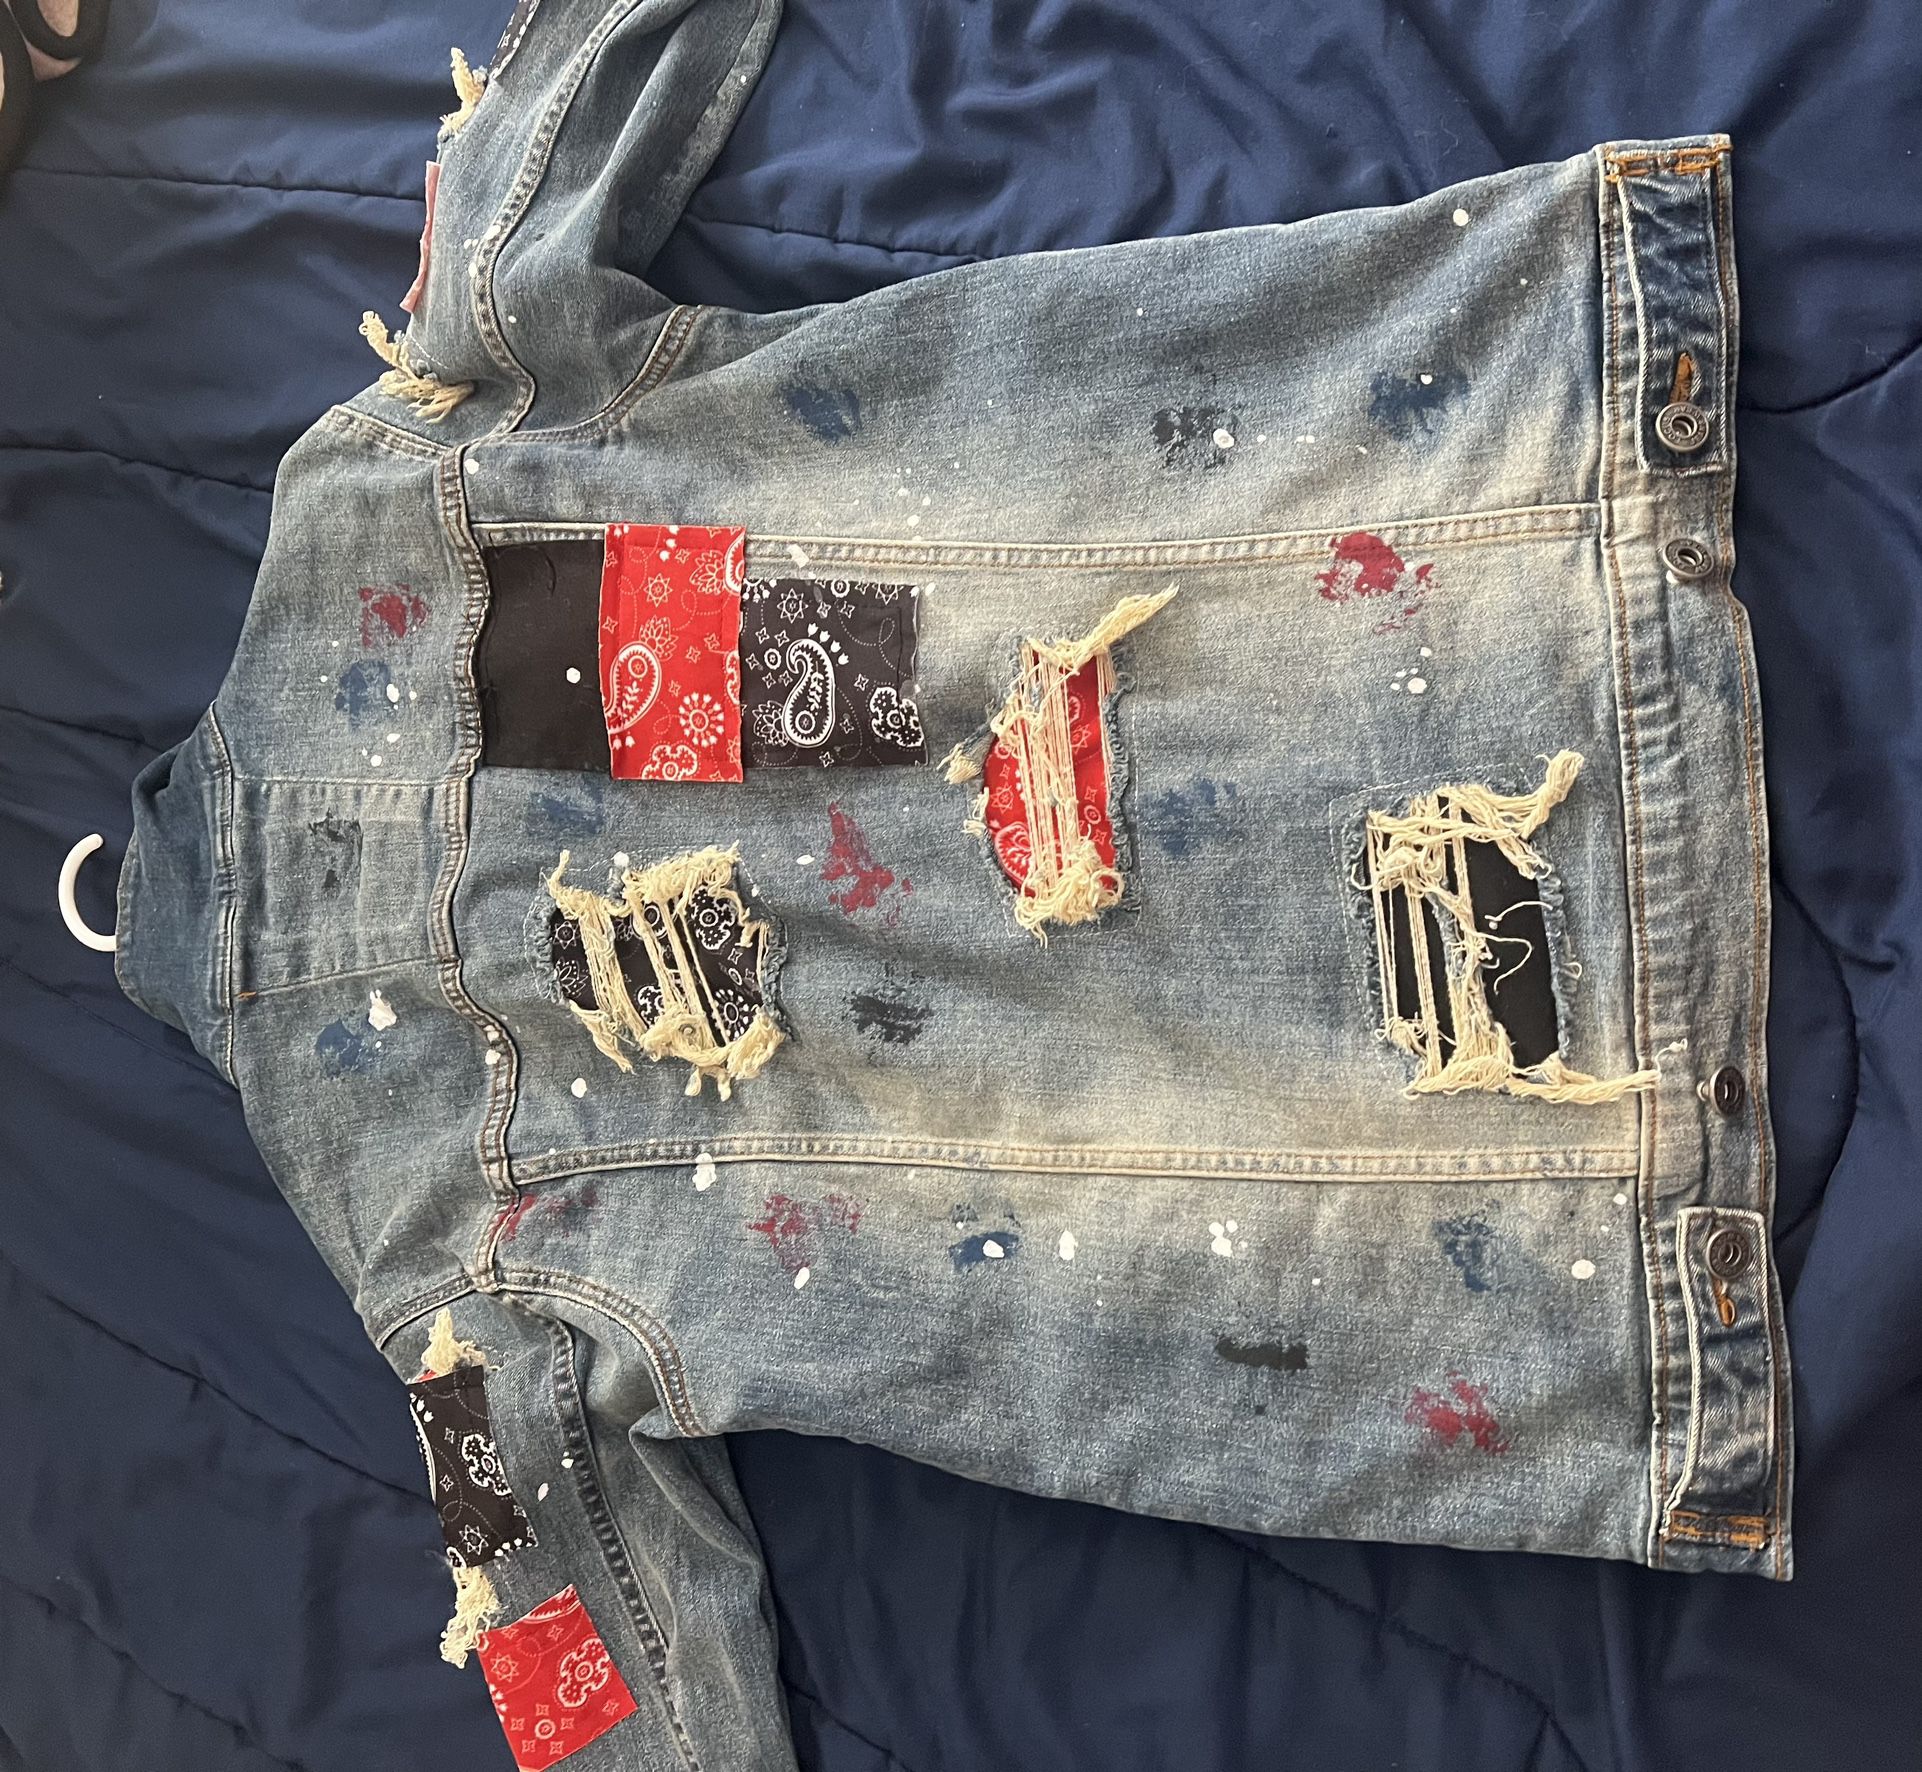 Jean Jacket From Outfitters